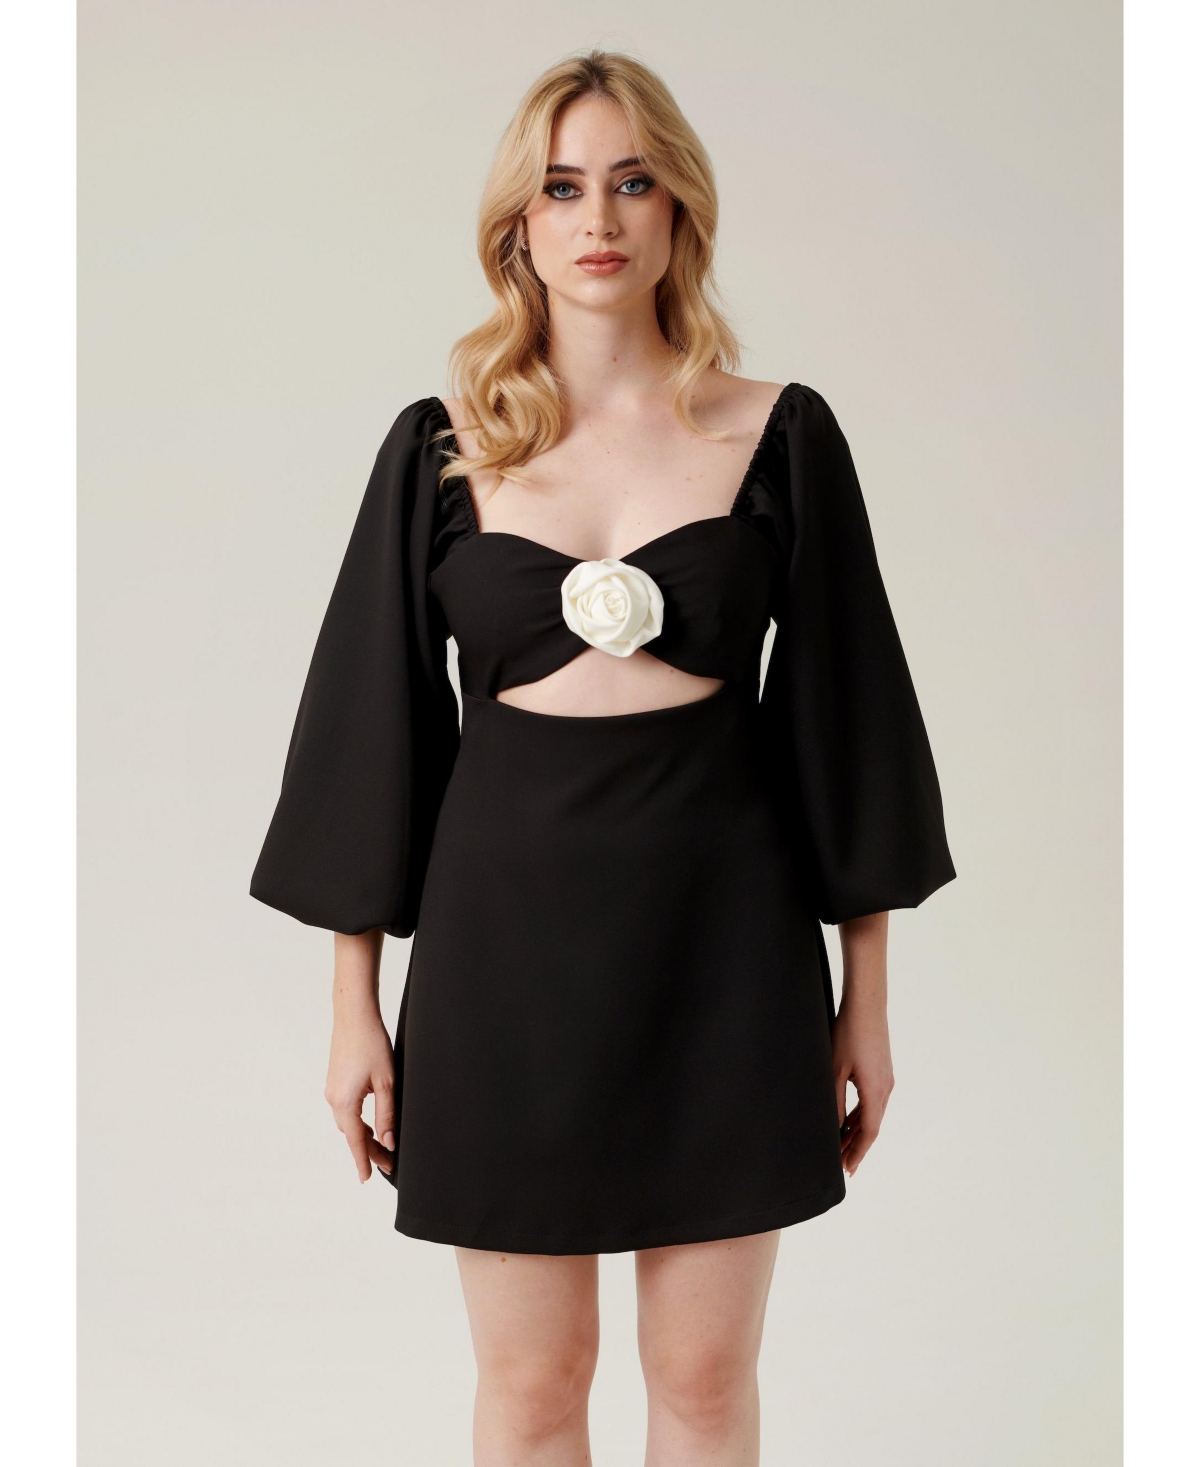 Women's Bell sleeve cut out black mini dress with rose detail - Black